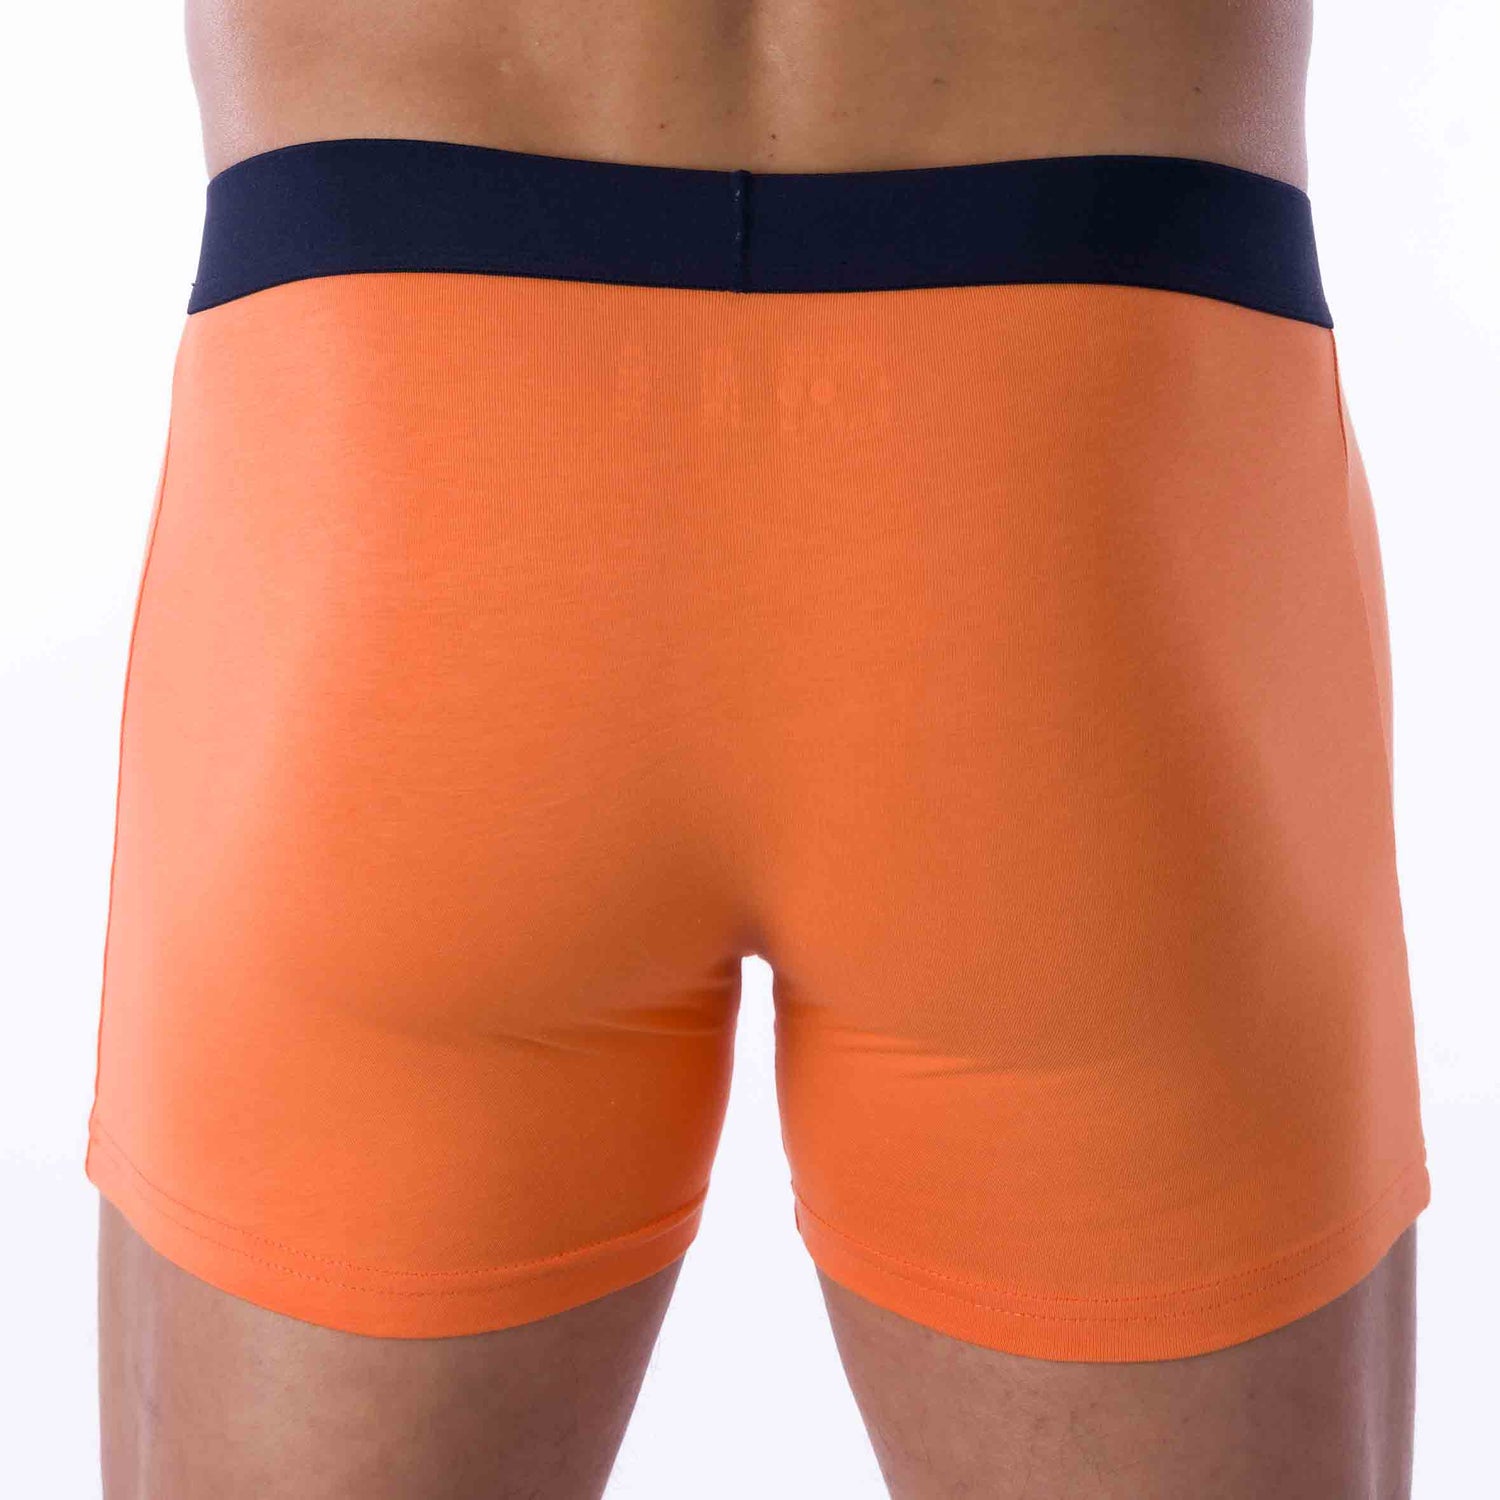 Pack of 2 Shorties in Organic Stretch Cotton Navy and Mandarin